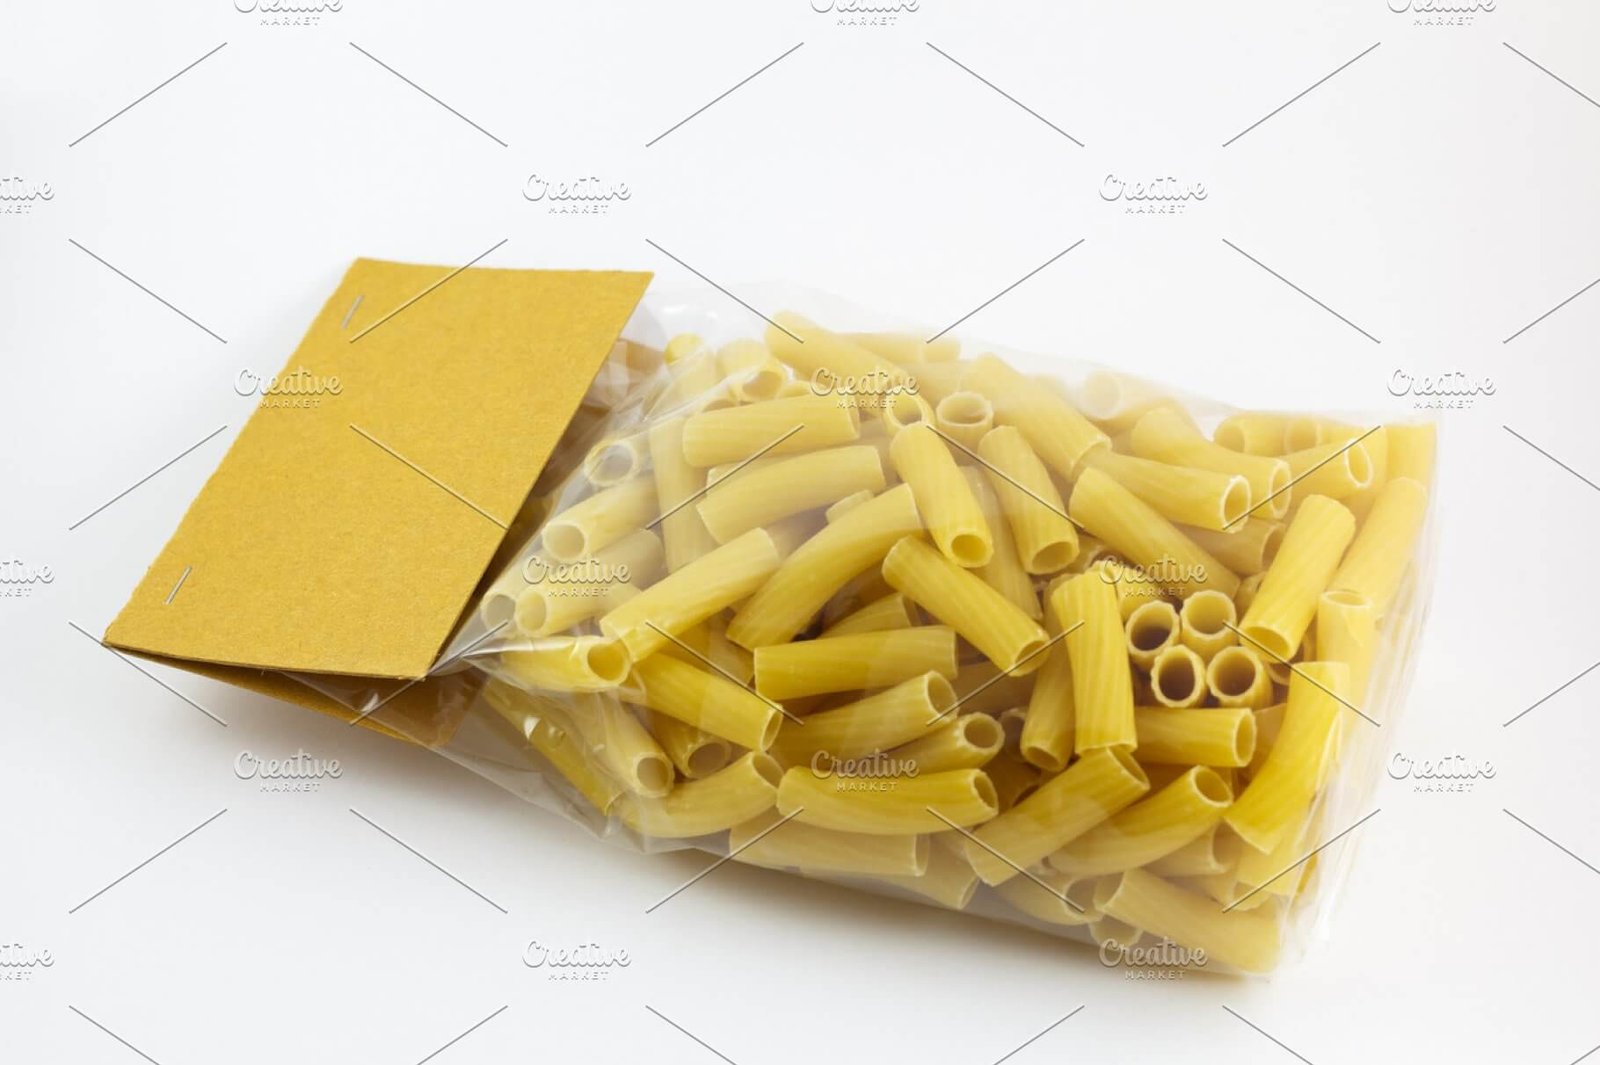 Pasta packaging containing pasta, macaroni, and package